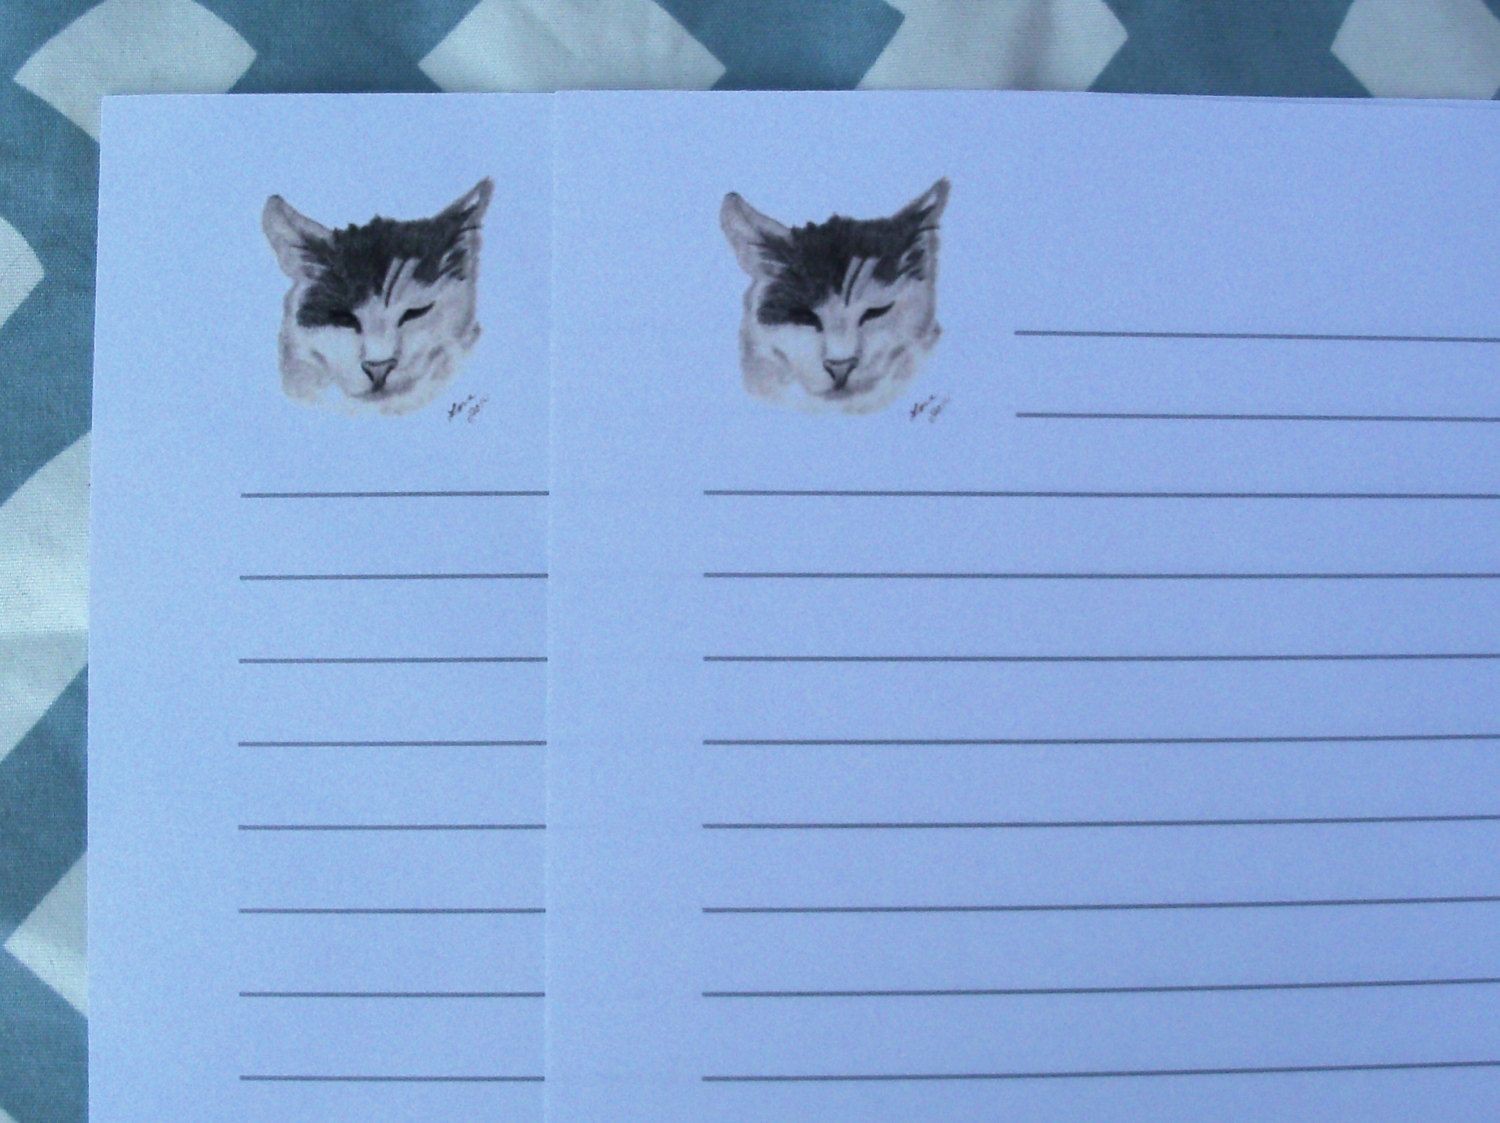 Papercraft Cat Stationery Letter Sheets Lined Stationery Sheets Kitten